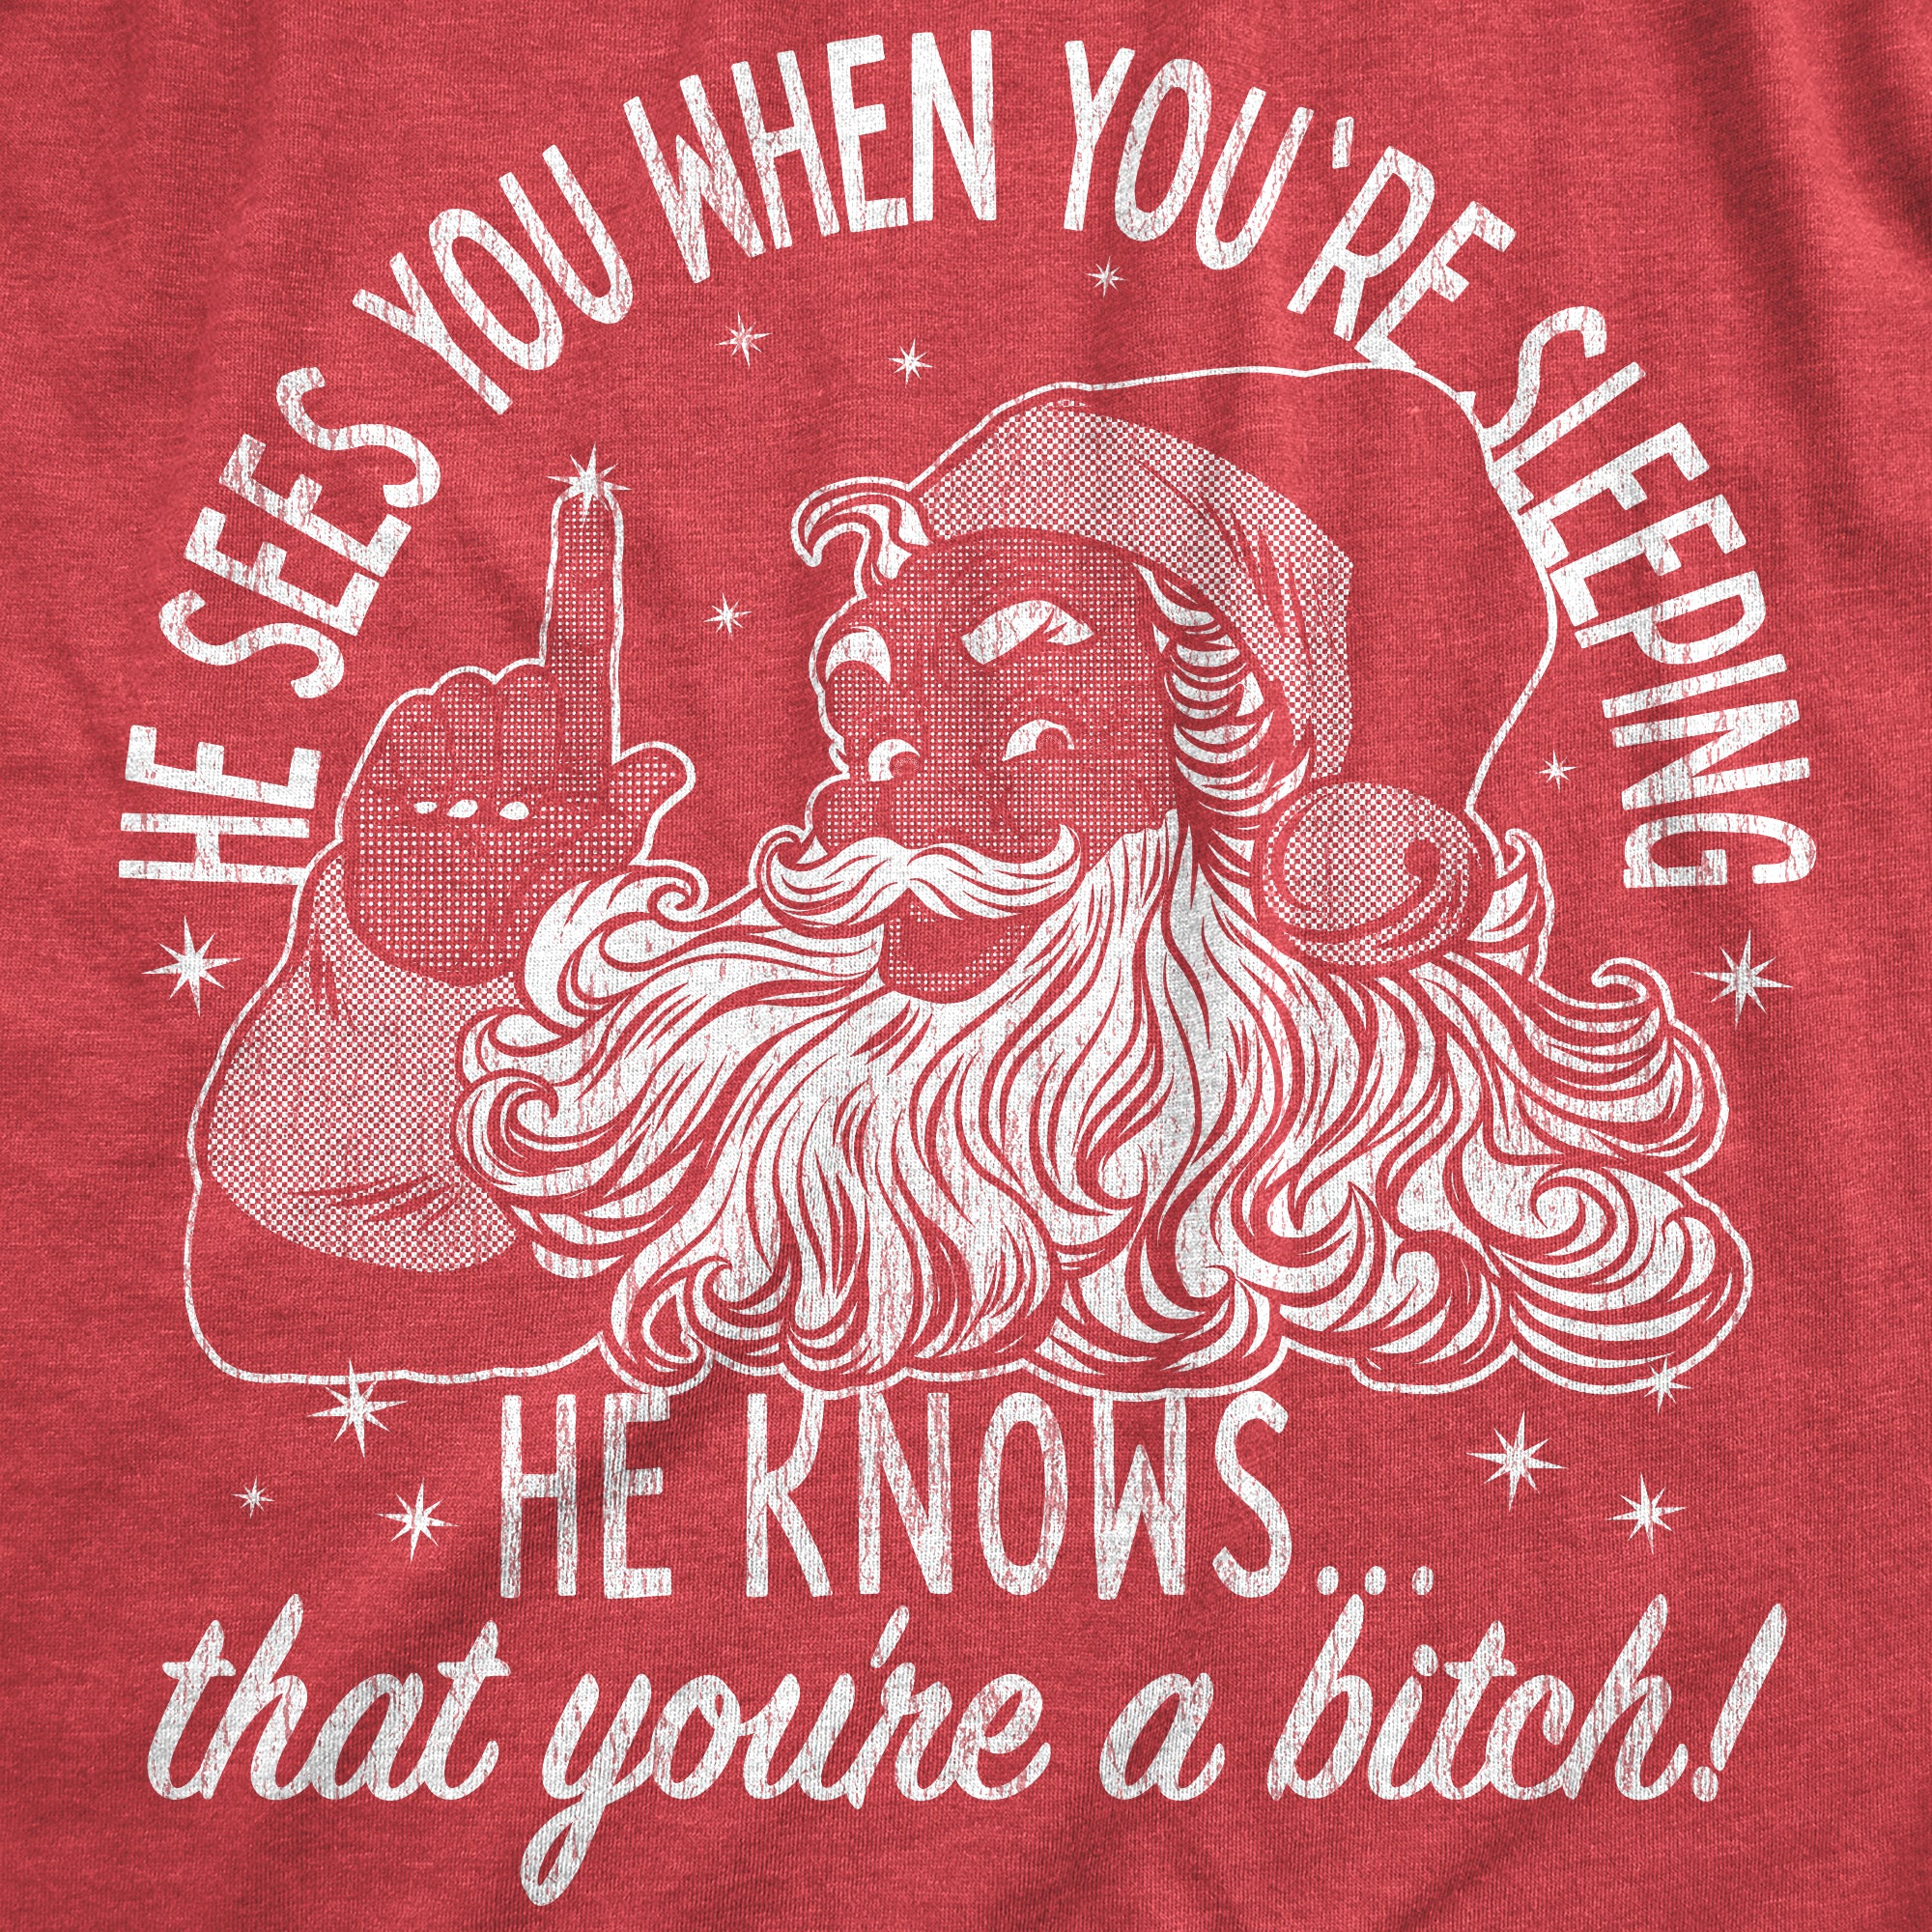 Funny Heather Red - BITCH He Knows That Youre A Bitch Mens T Shirt Nerdy Christmas Sarcastic Tee